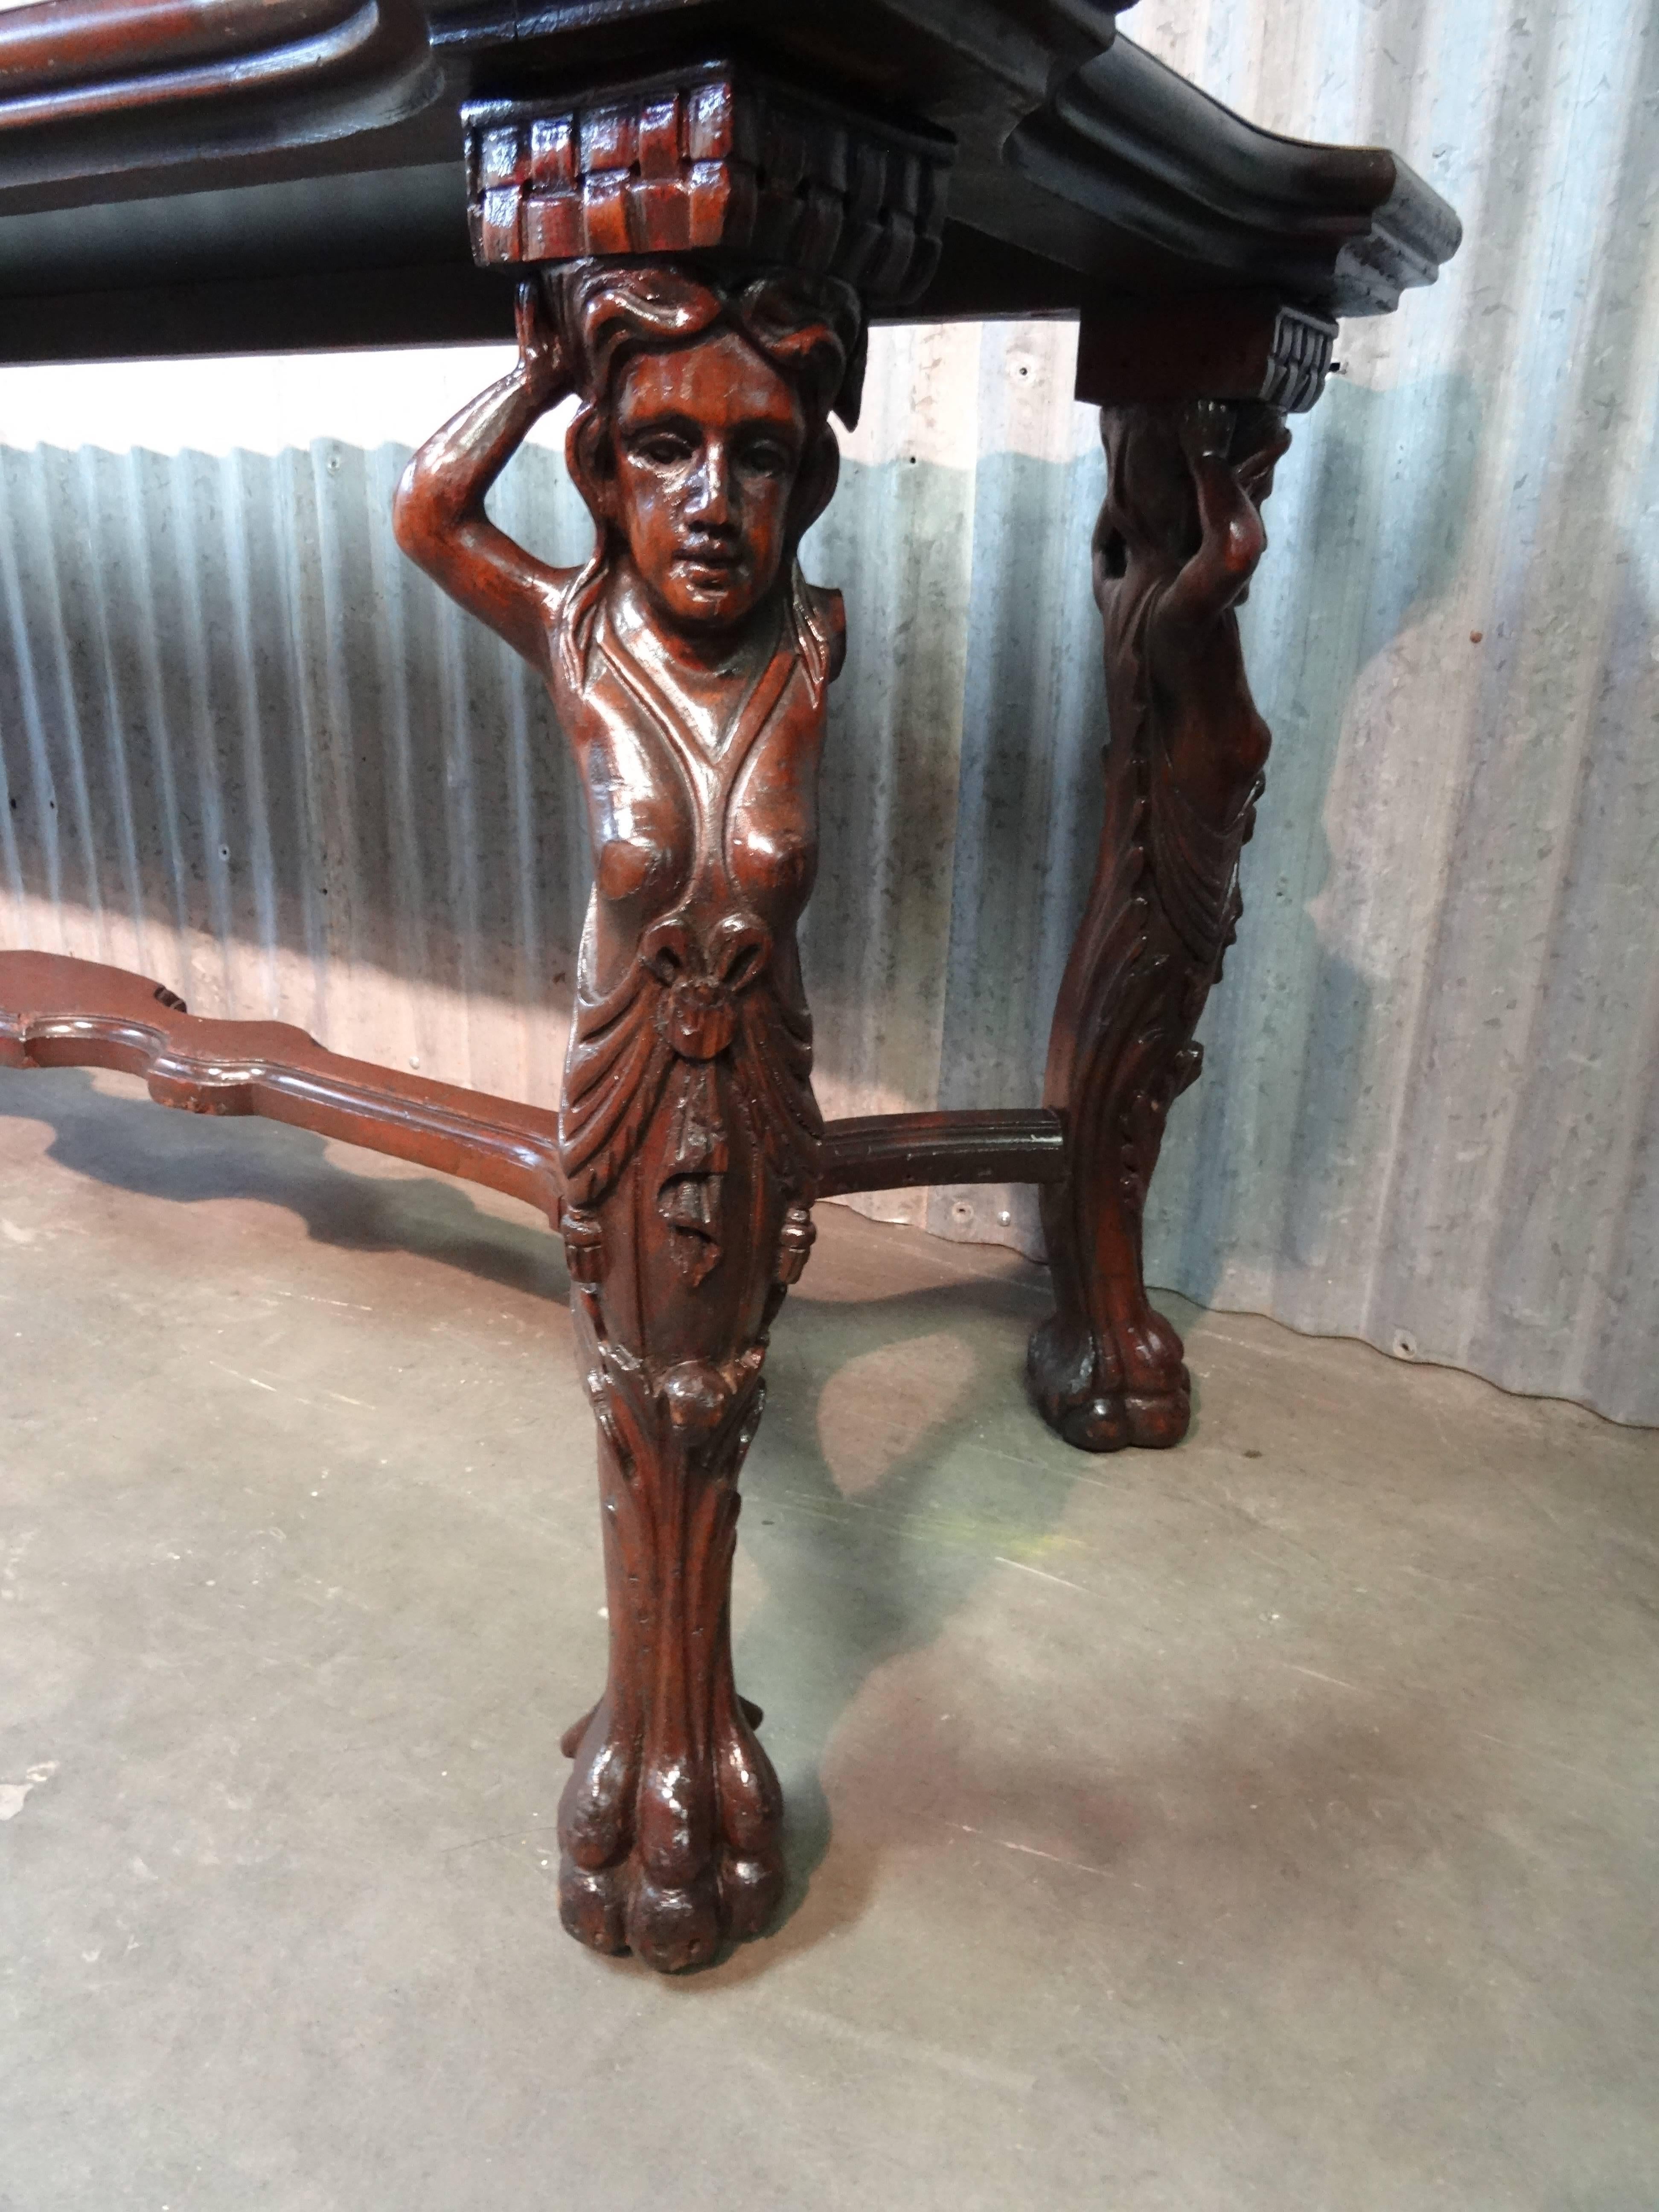 Hand-carved, walnut, nymph table with added industrial flare.  Could be a 19th century piece, early 20th century for sure.  This table beams with dings, dents and bruises of the past, but still very charming.  The top was destroyed, but originally